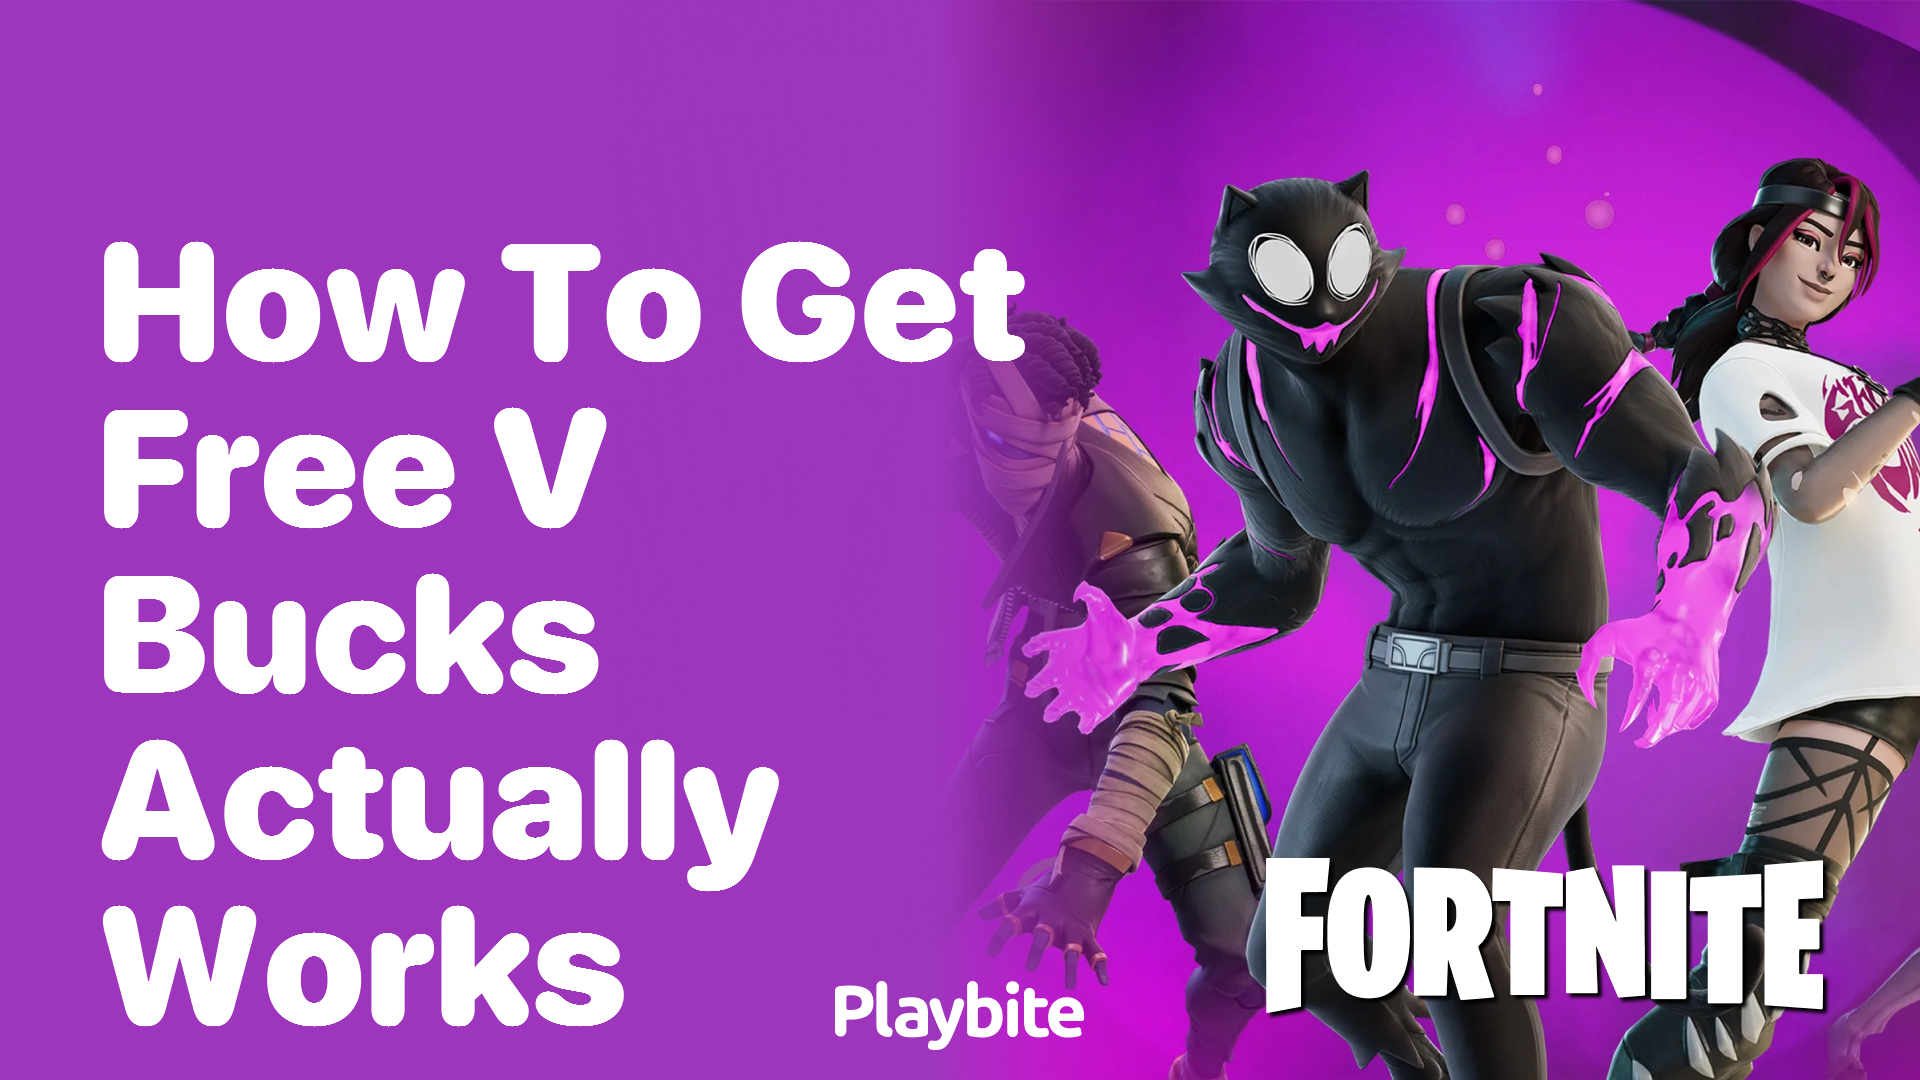 How to Get Free V-Bucks That Actually Works